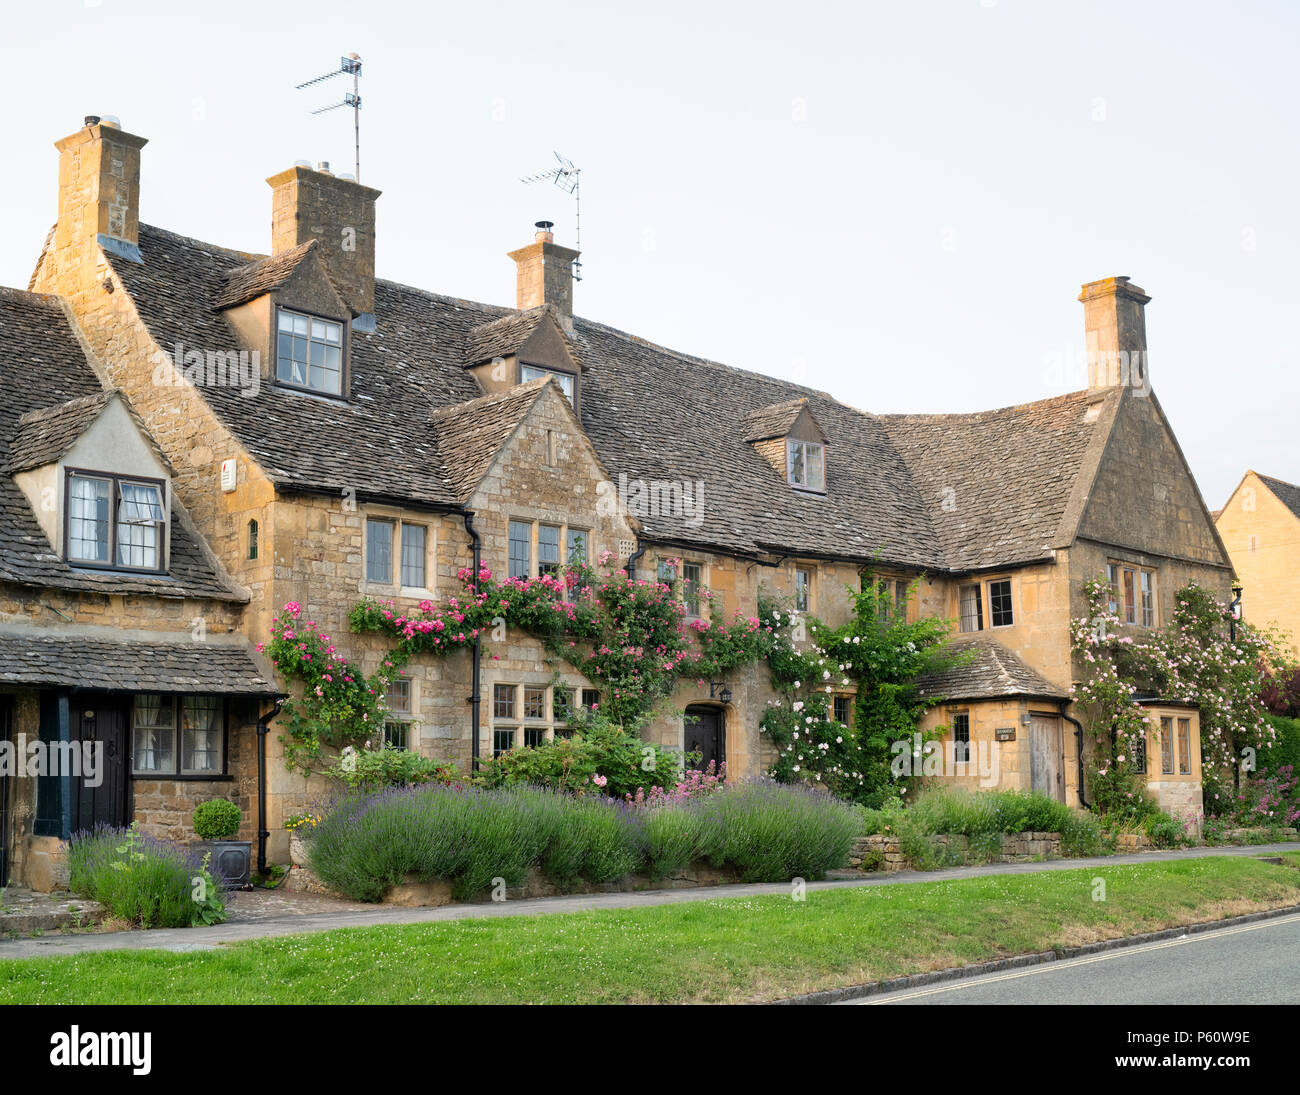 Cotswold stone house in estate. Broadway, Cotswolds, Worcestershire, Inghilterra Foto Stock